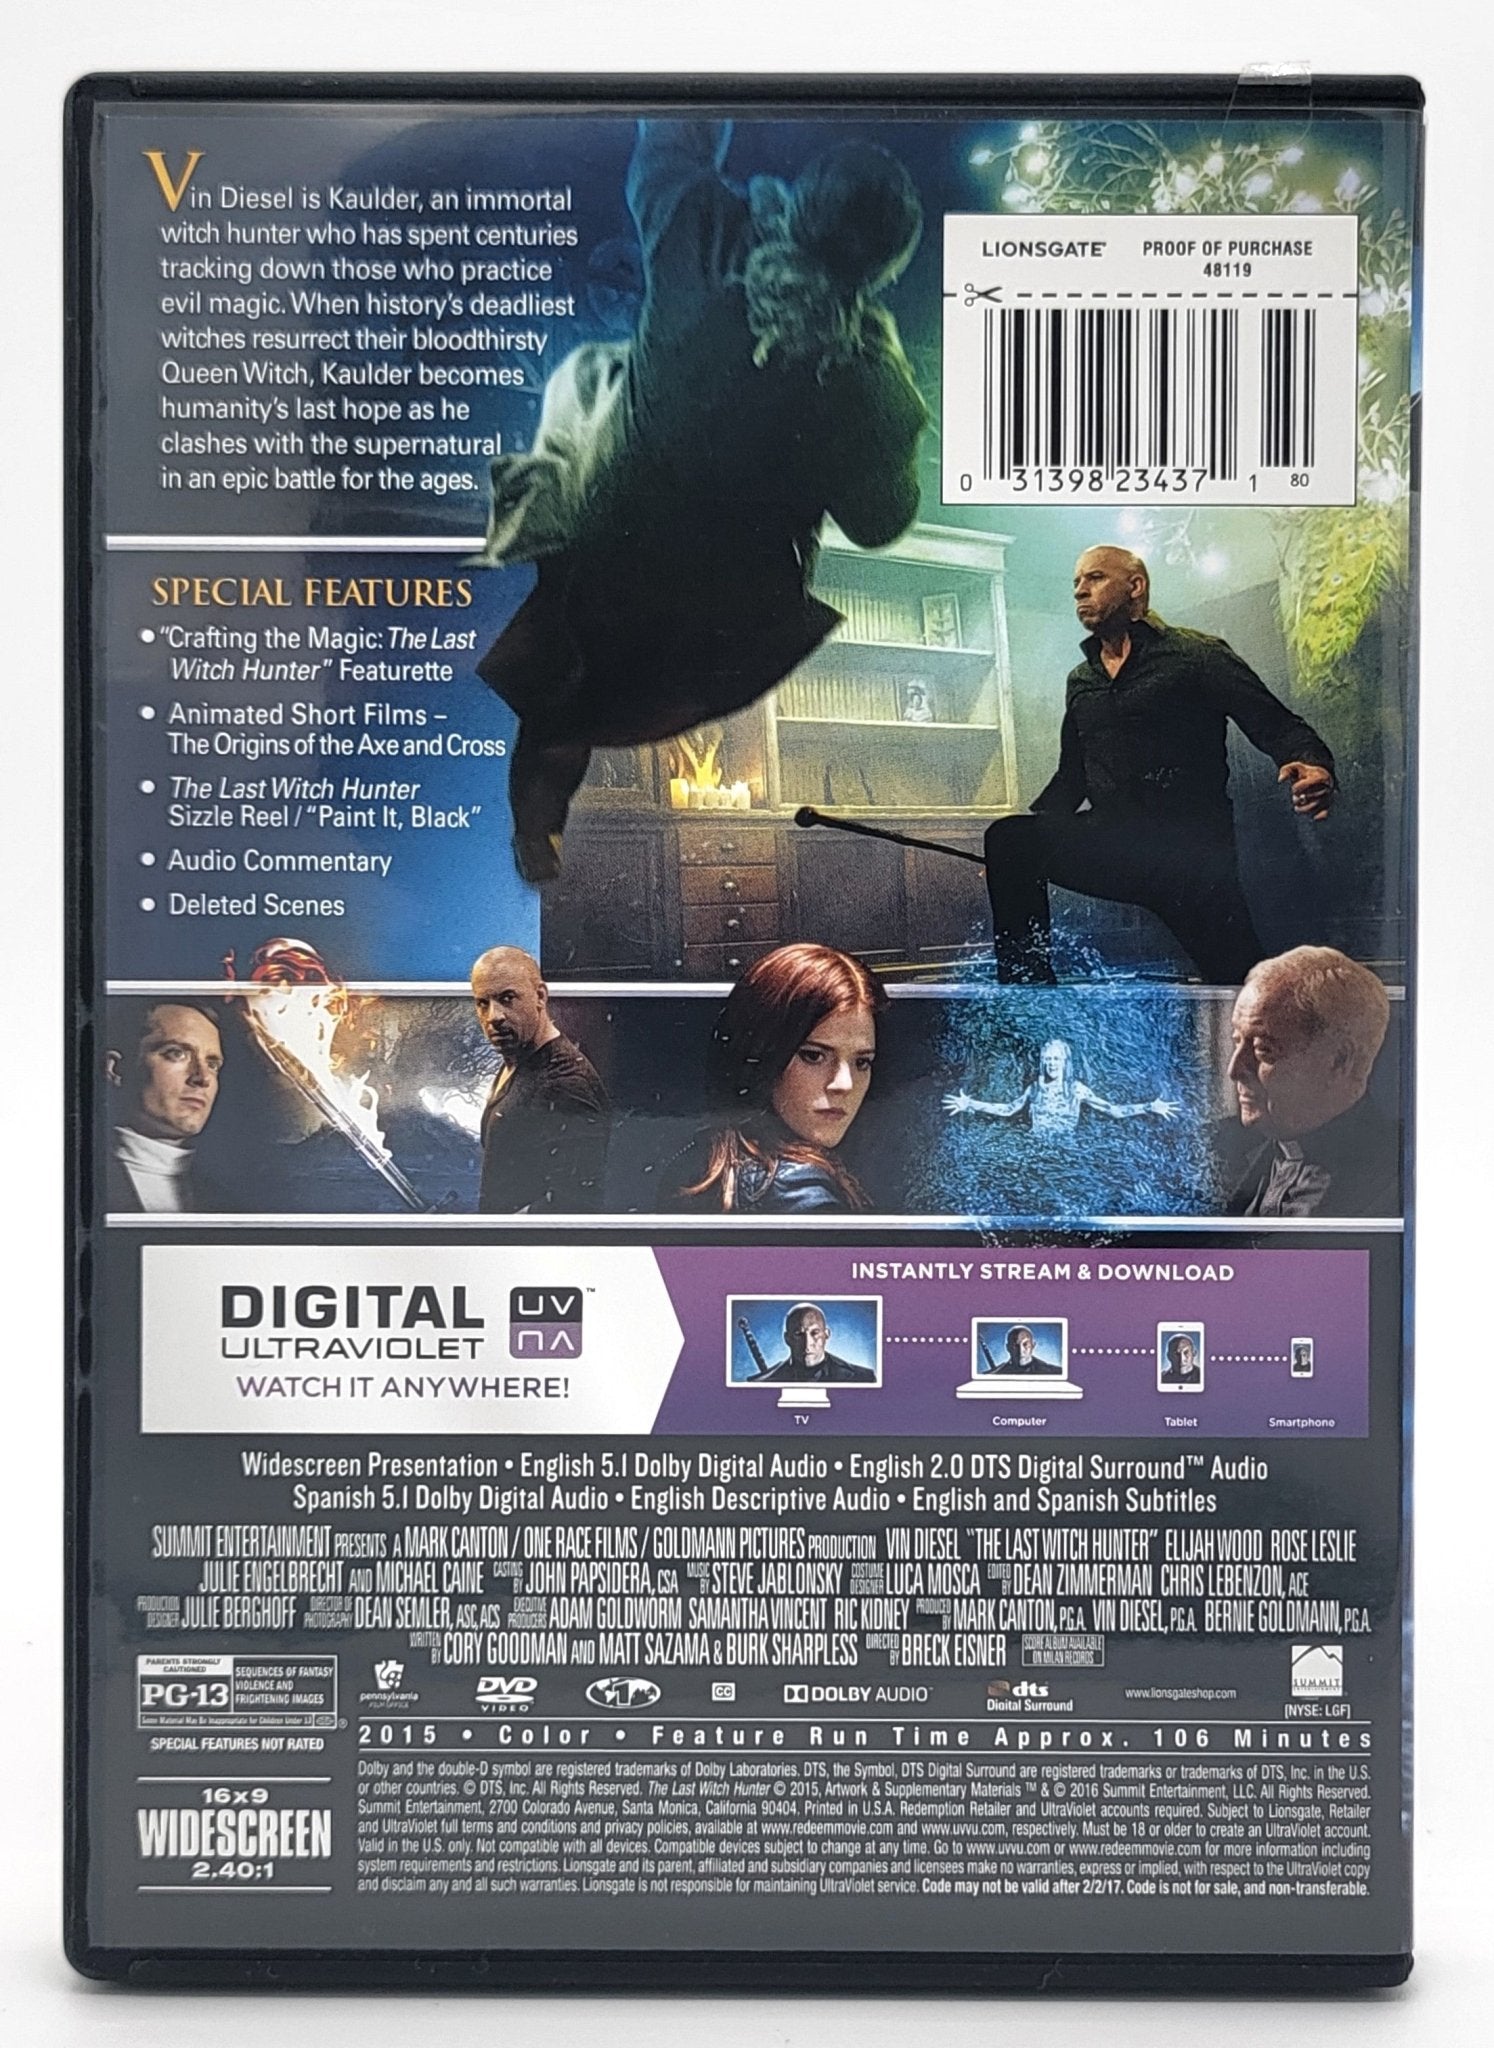 Summit Entertainment - The Last Witch Hunter | DVD | Widescreen - DVD - Steady Bunny Shop